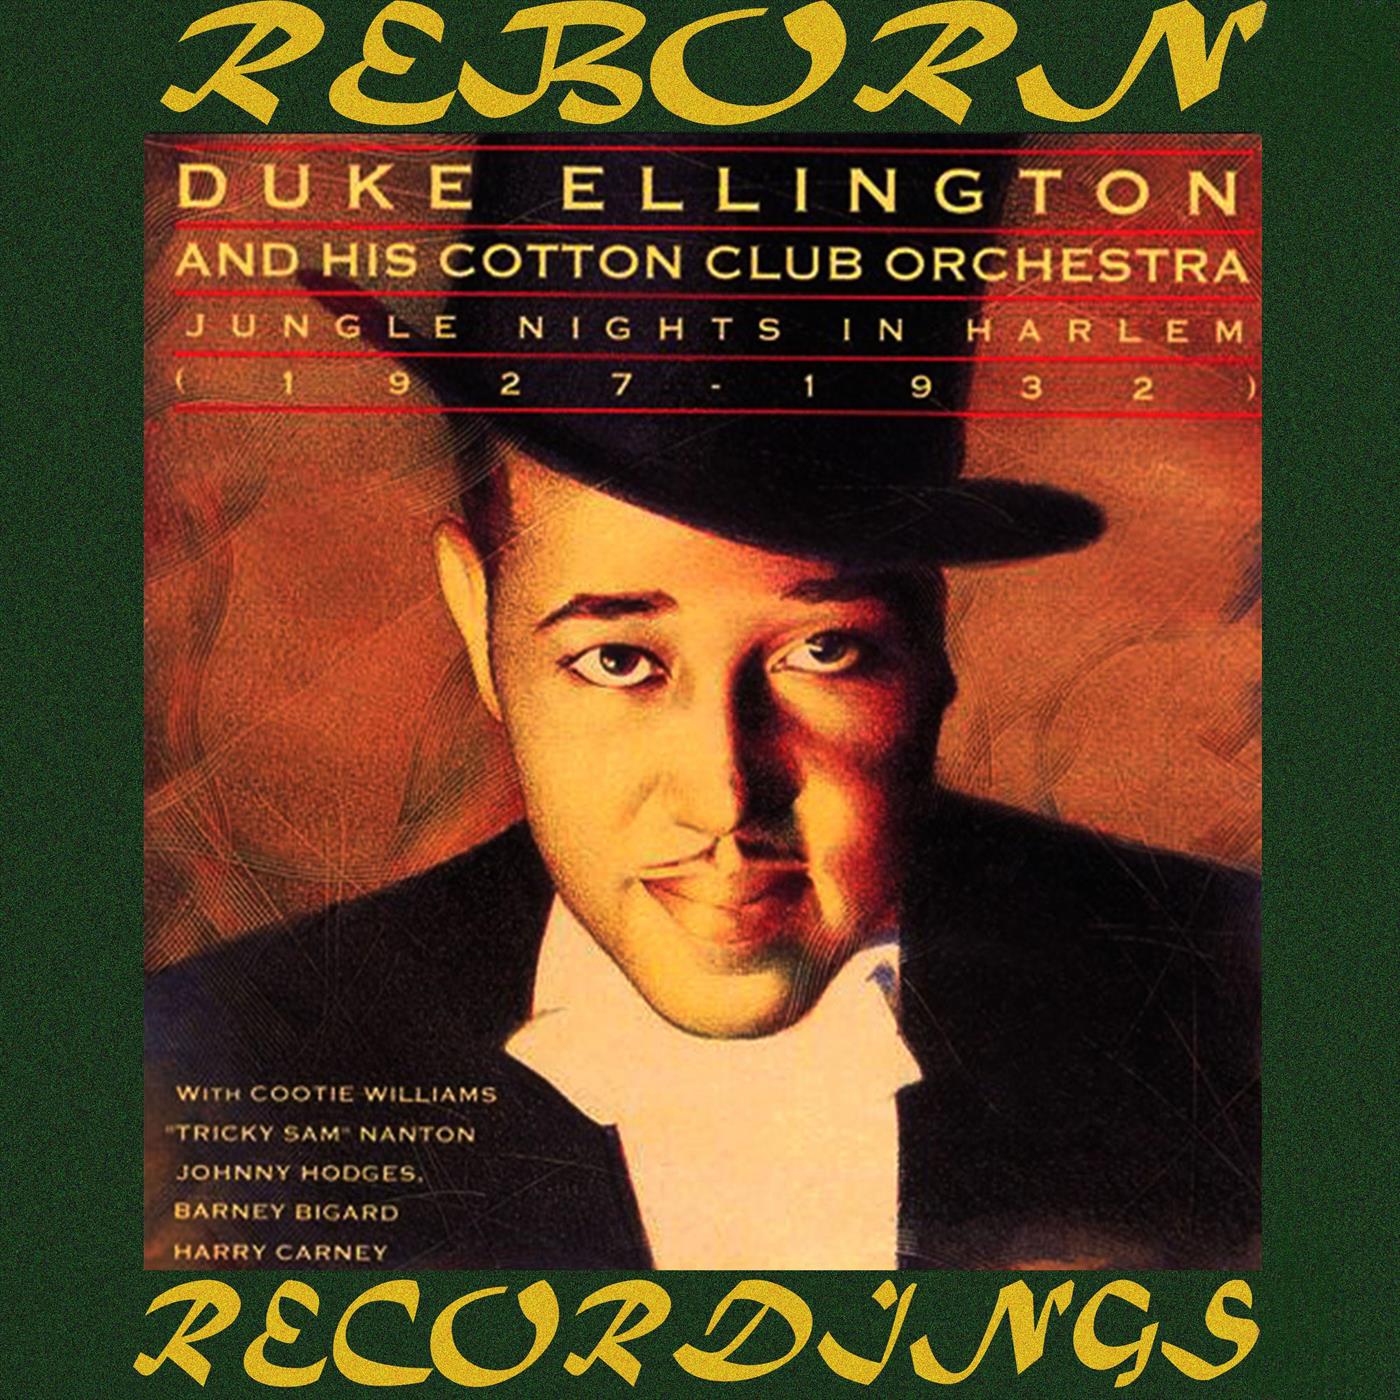 A Night At The Cotton Club, Pt. 1 / Cotton Club Stomp / Misty Morning